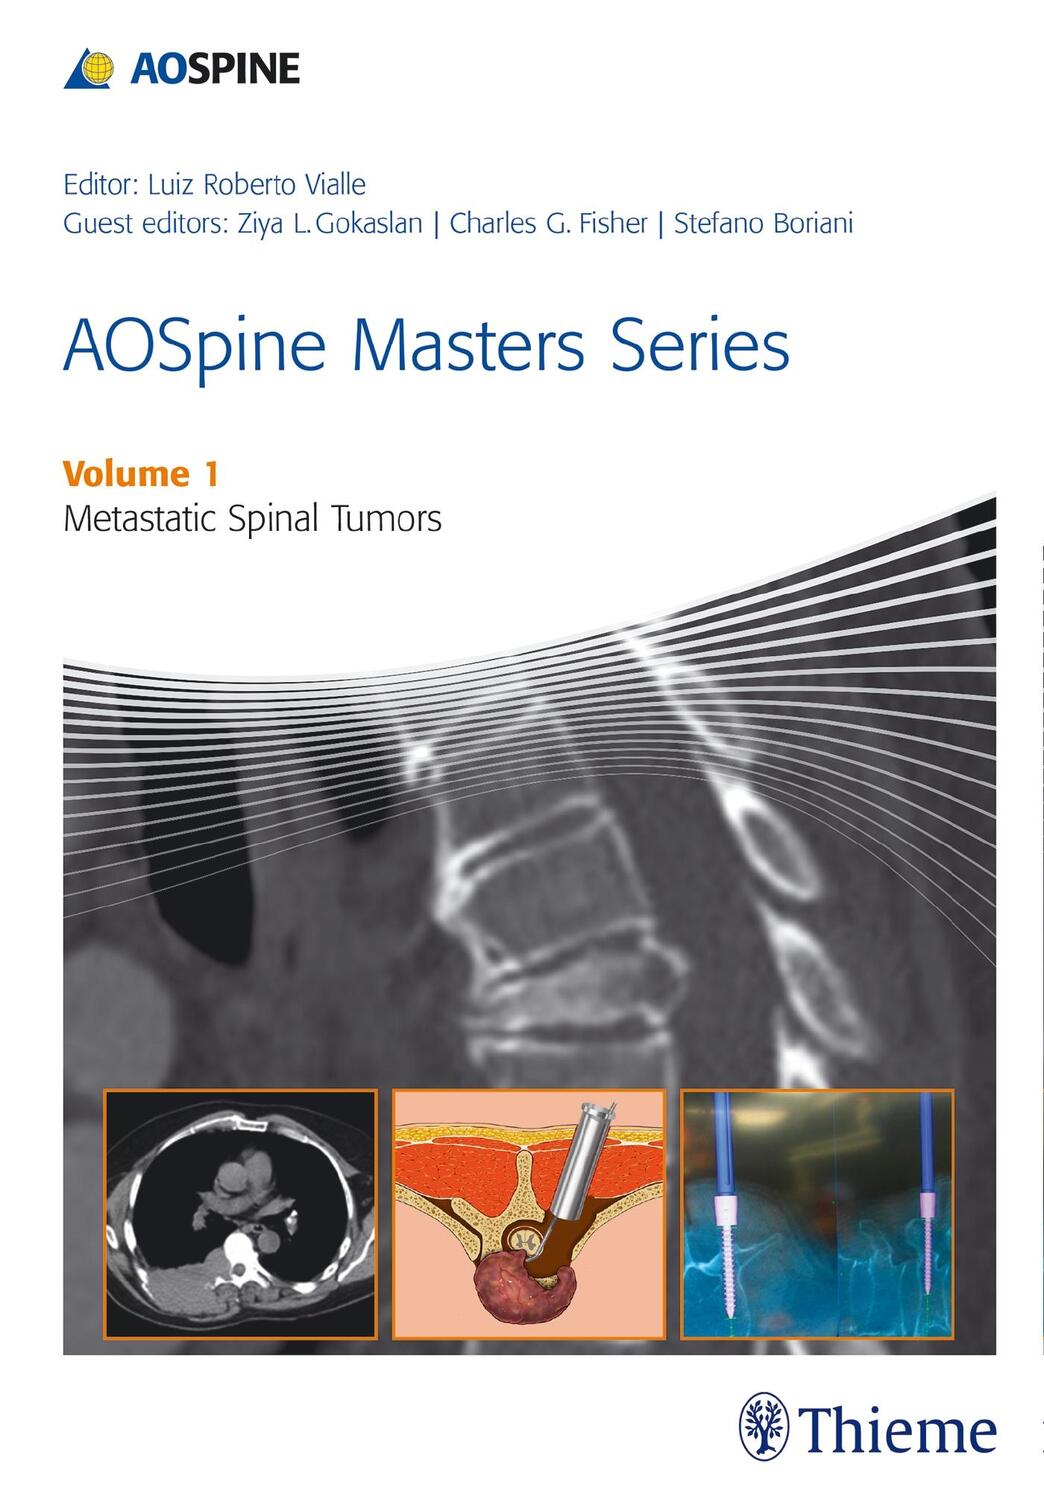 Cover: 9781626230460 | Aospine Masters Series Volume 1: Metastatic Spinal Tumors | Vialle